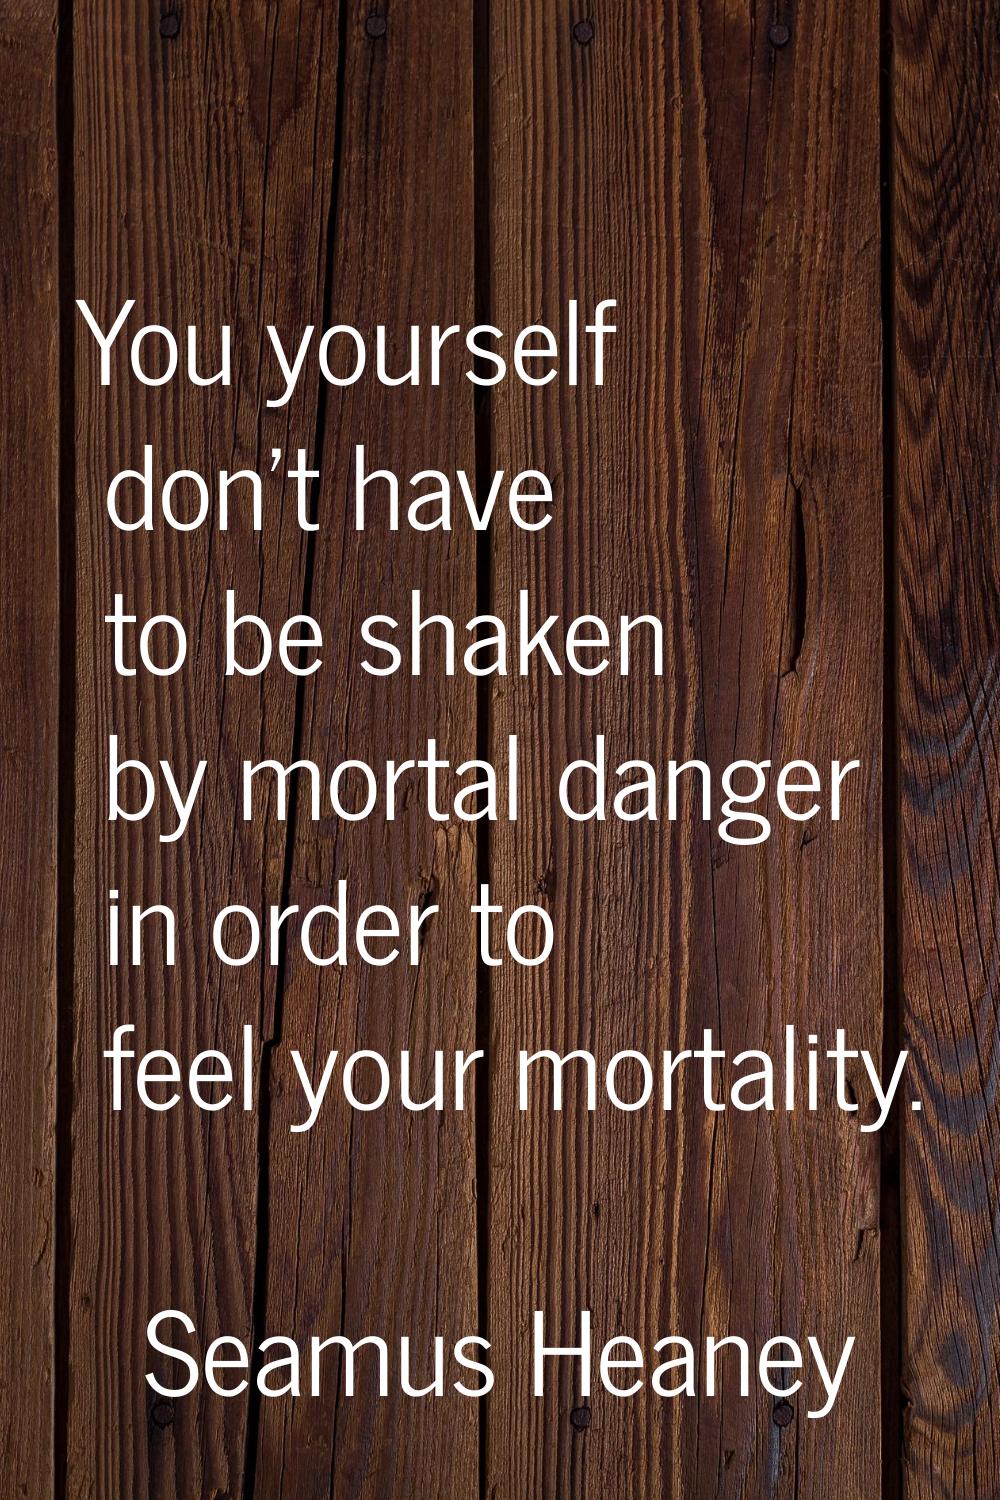 You yourself don't have to be shaken by mortal danger in order to feel your mortality.